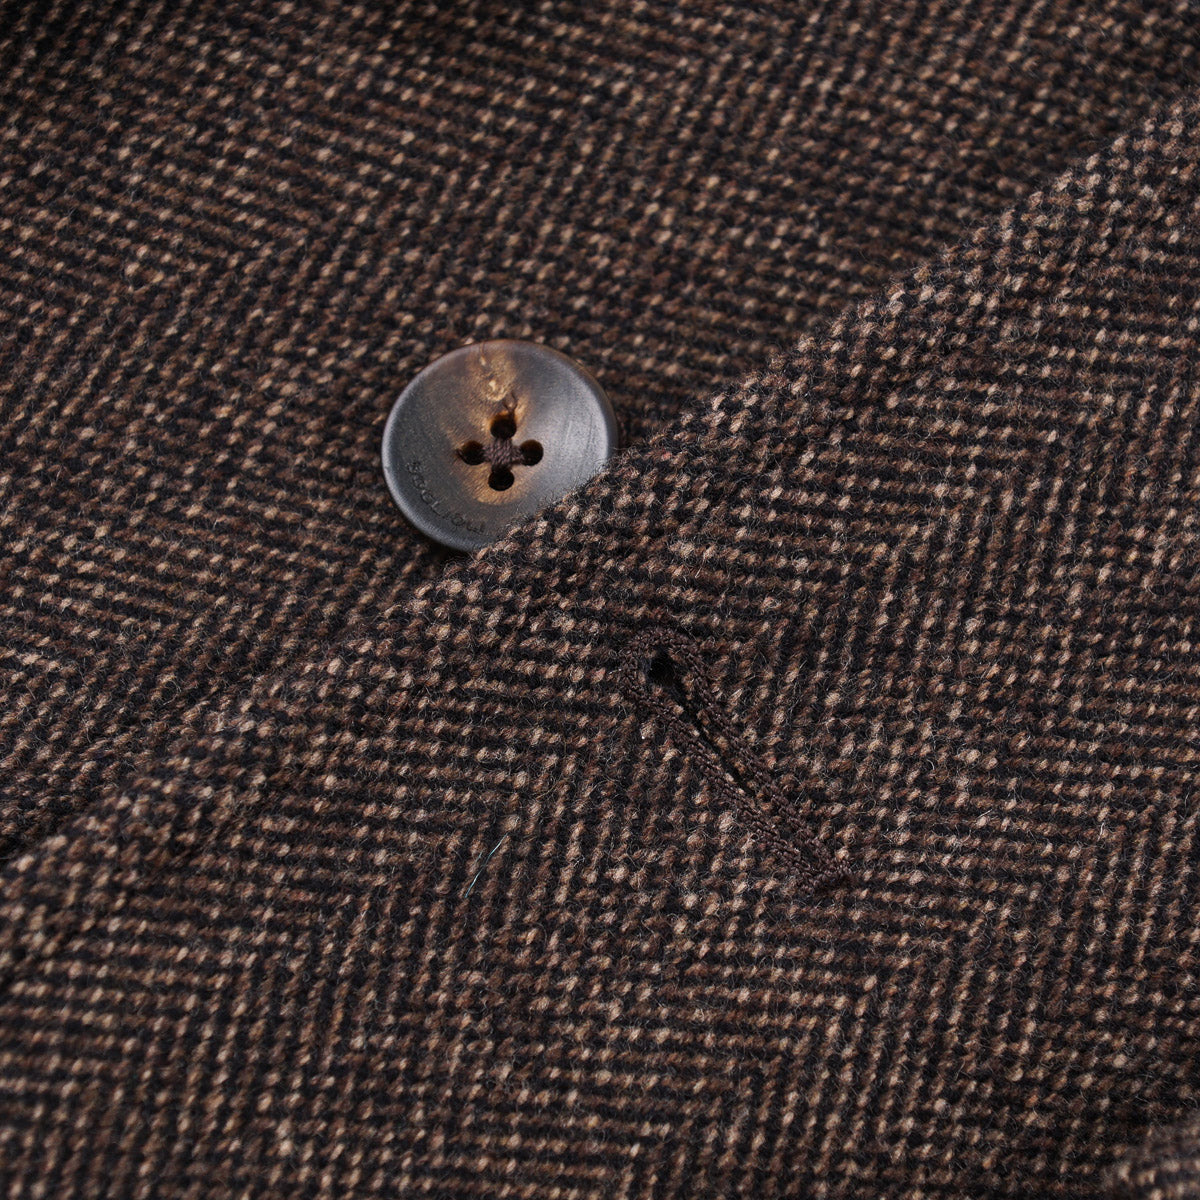 Boglioli Wool Outer Blazer with Quilted Lining - Top Shelf Apparel